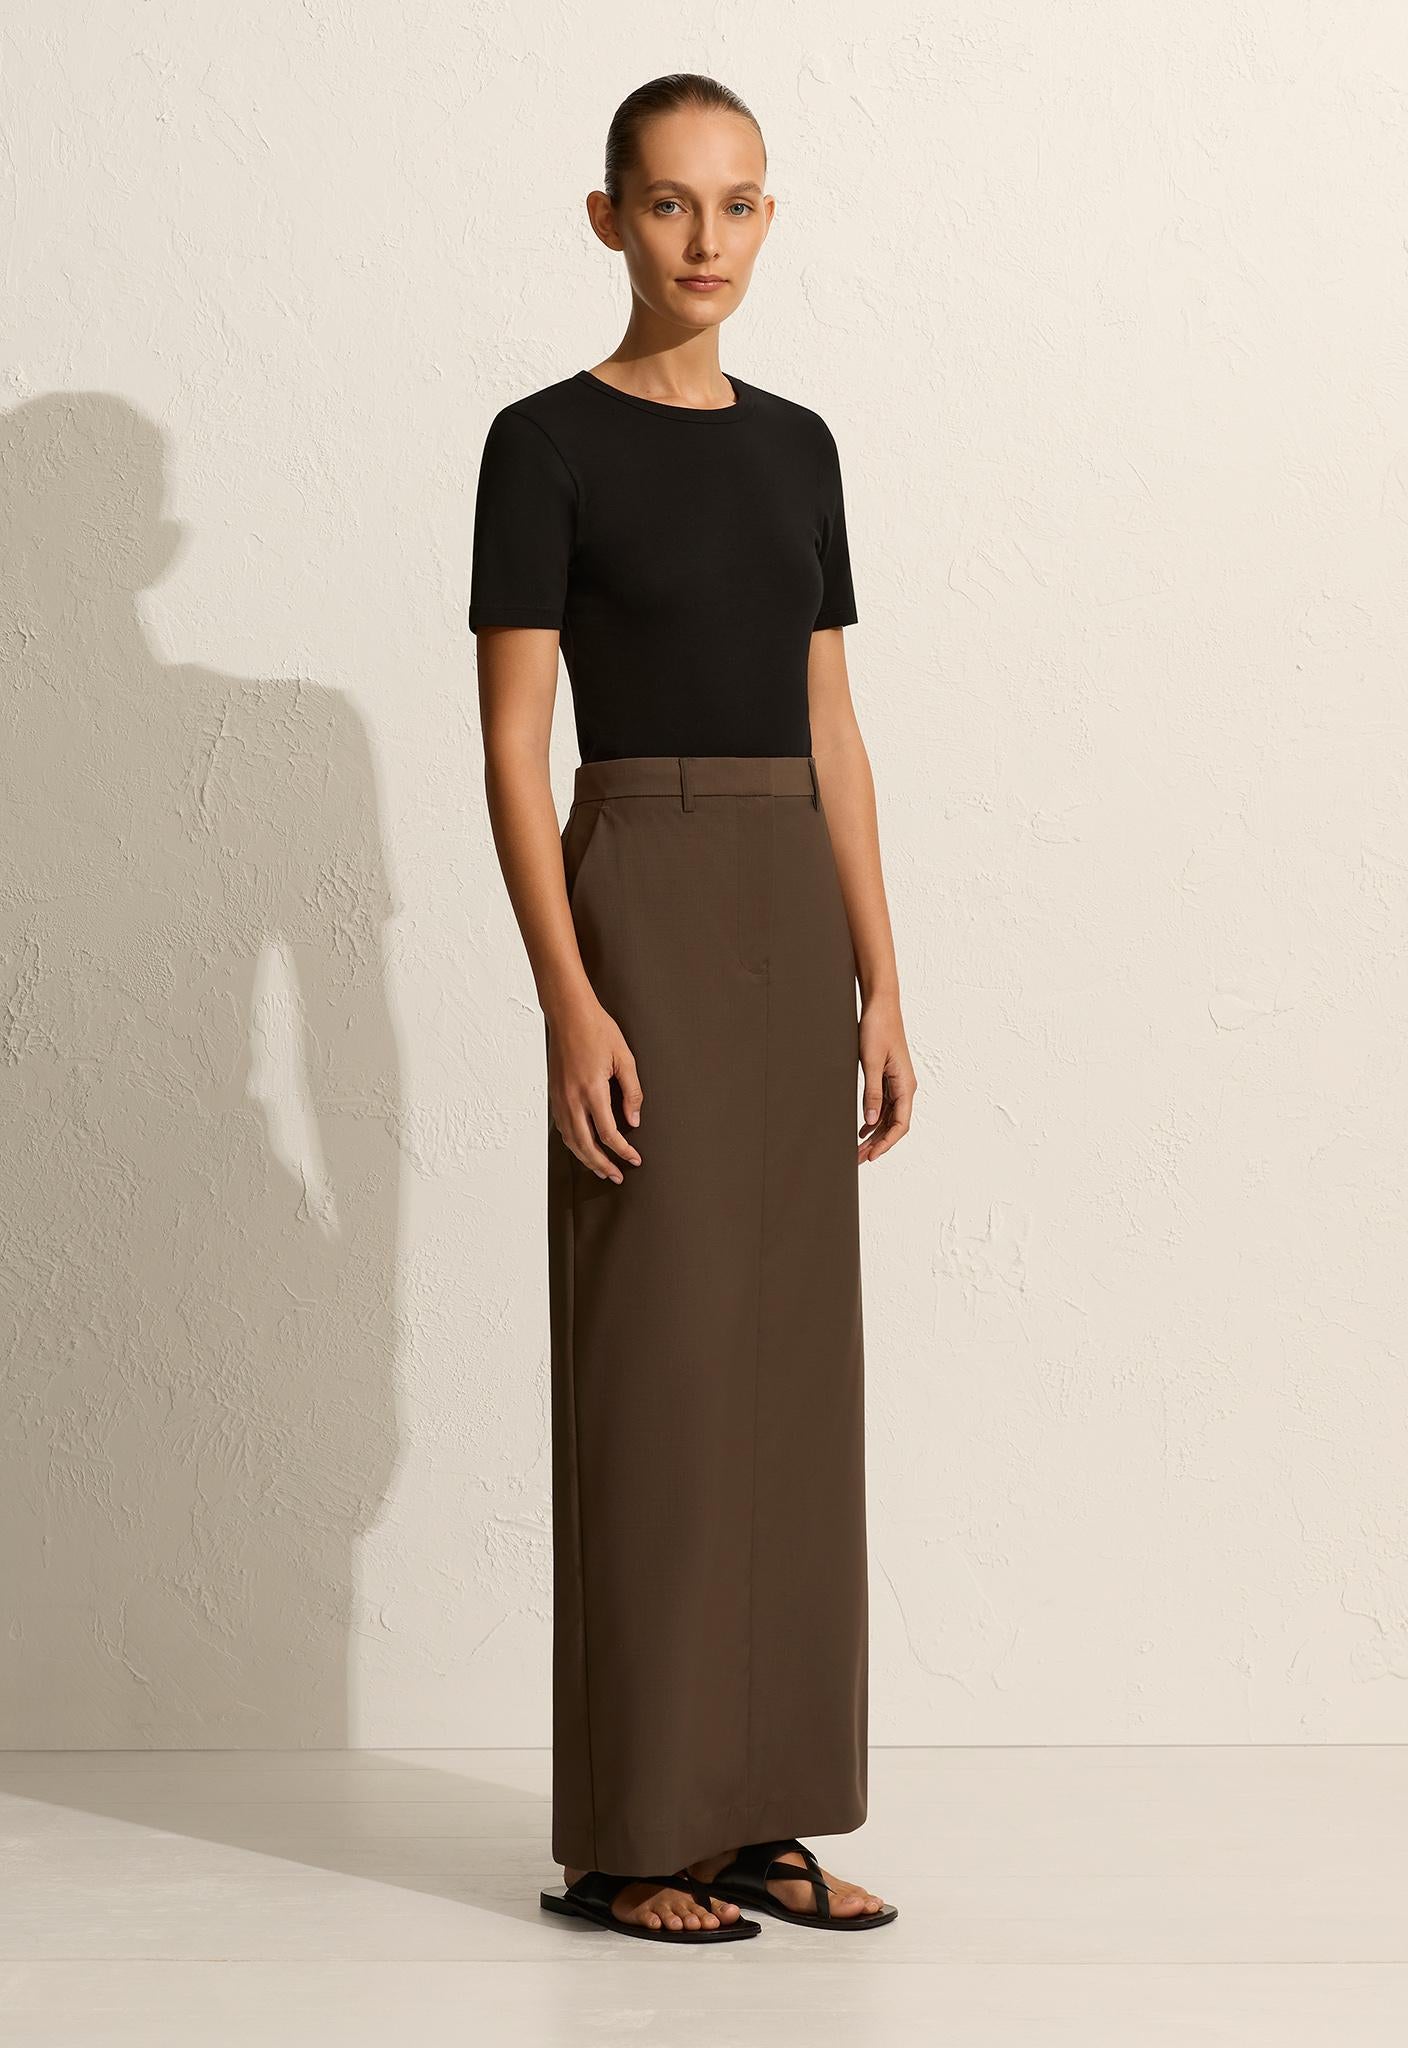 Relaxed Tailored Skirt - Coffee - Matteau